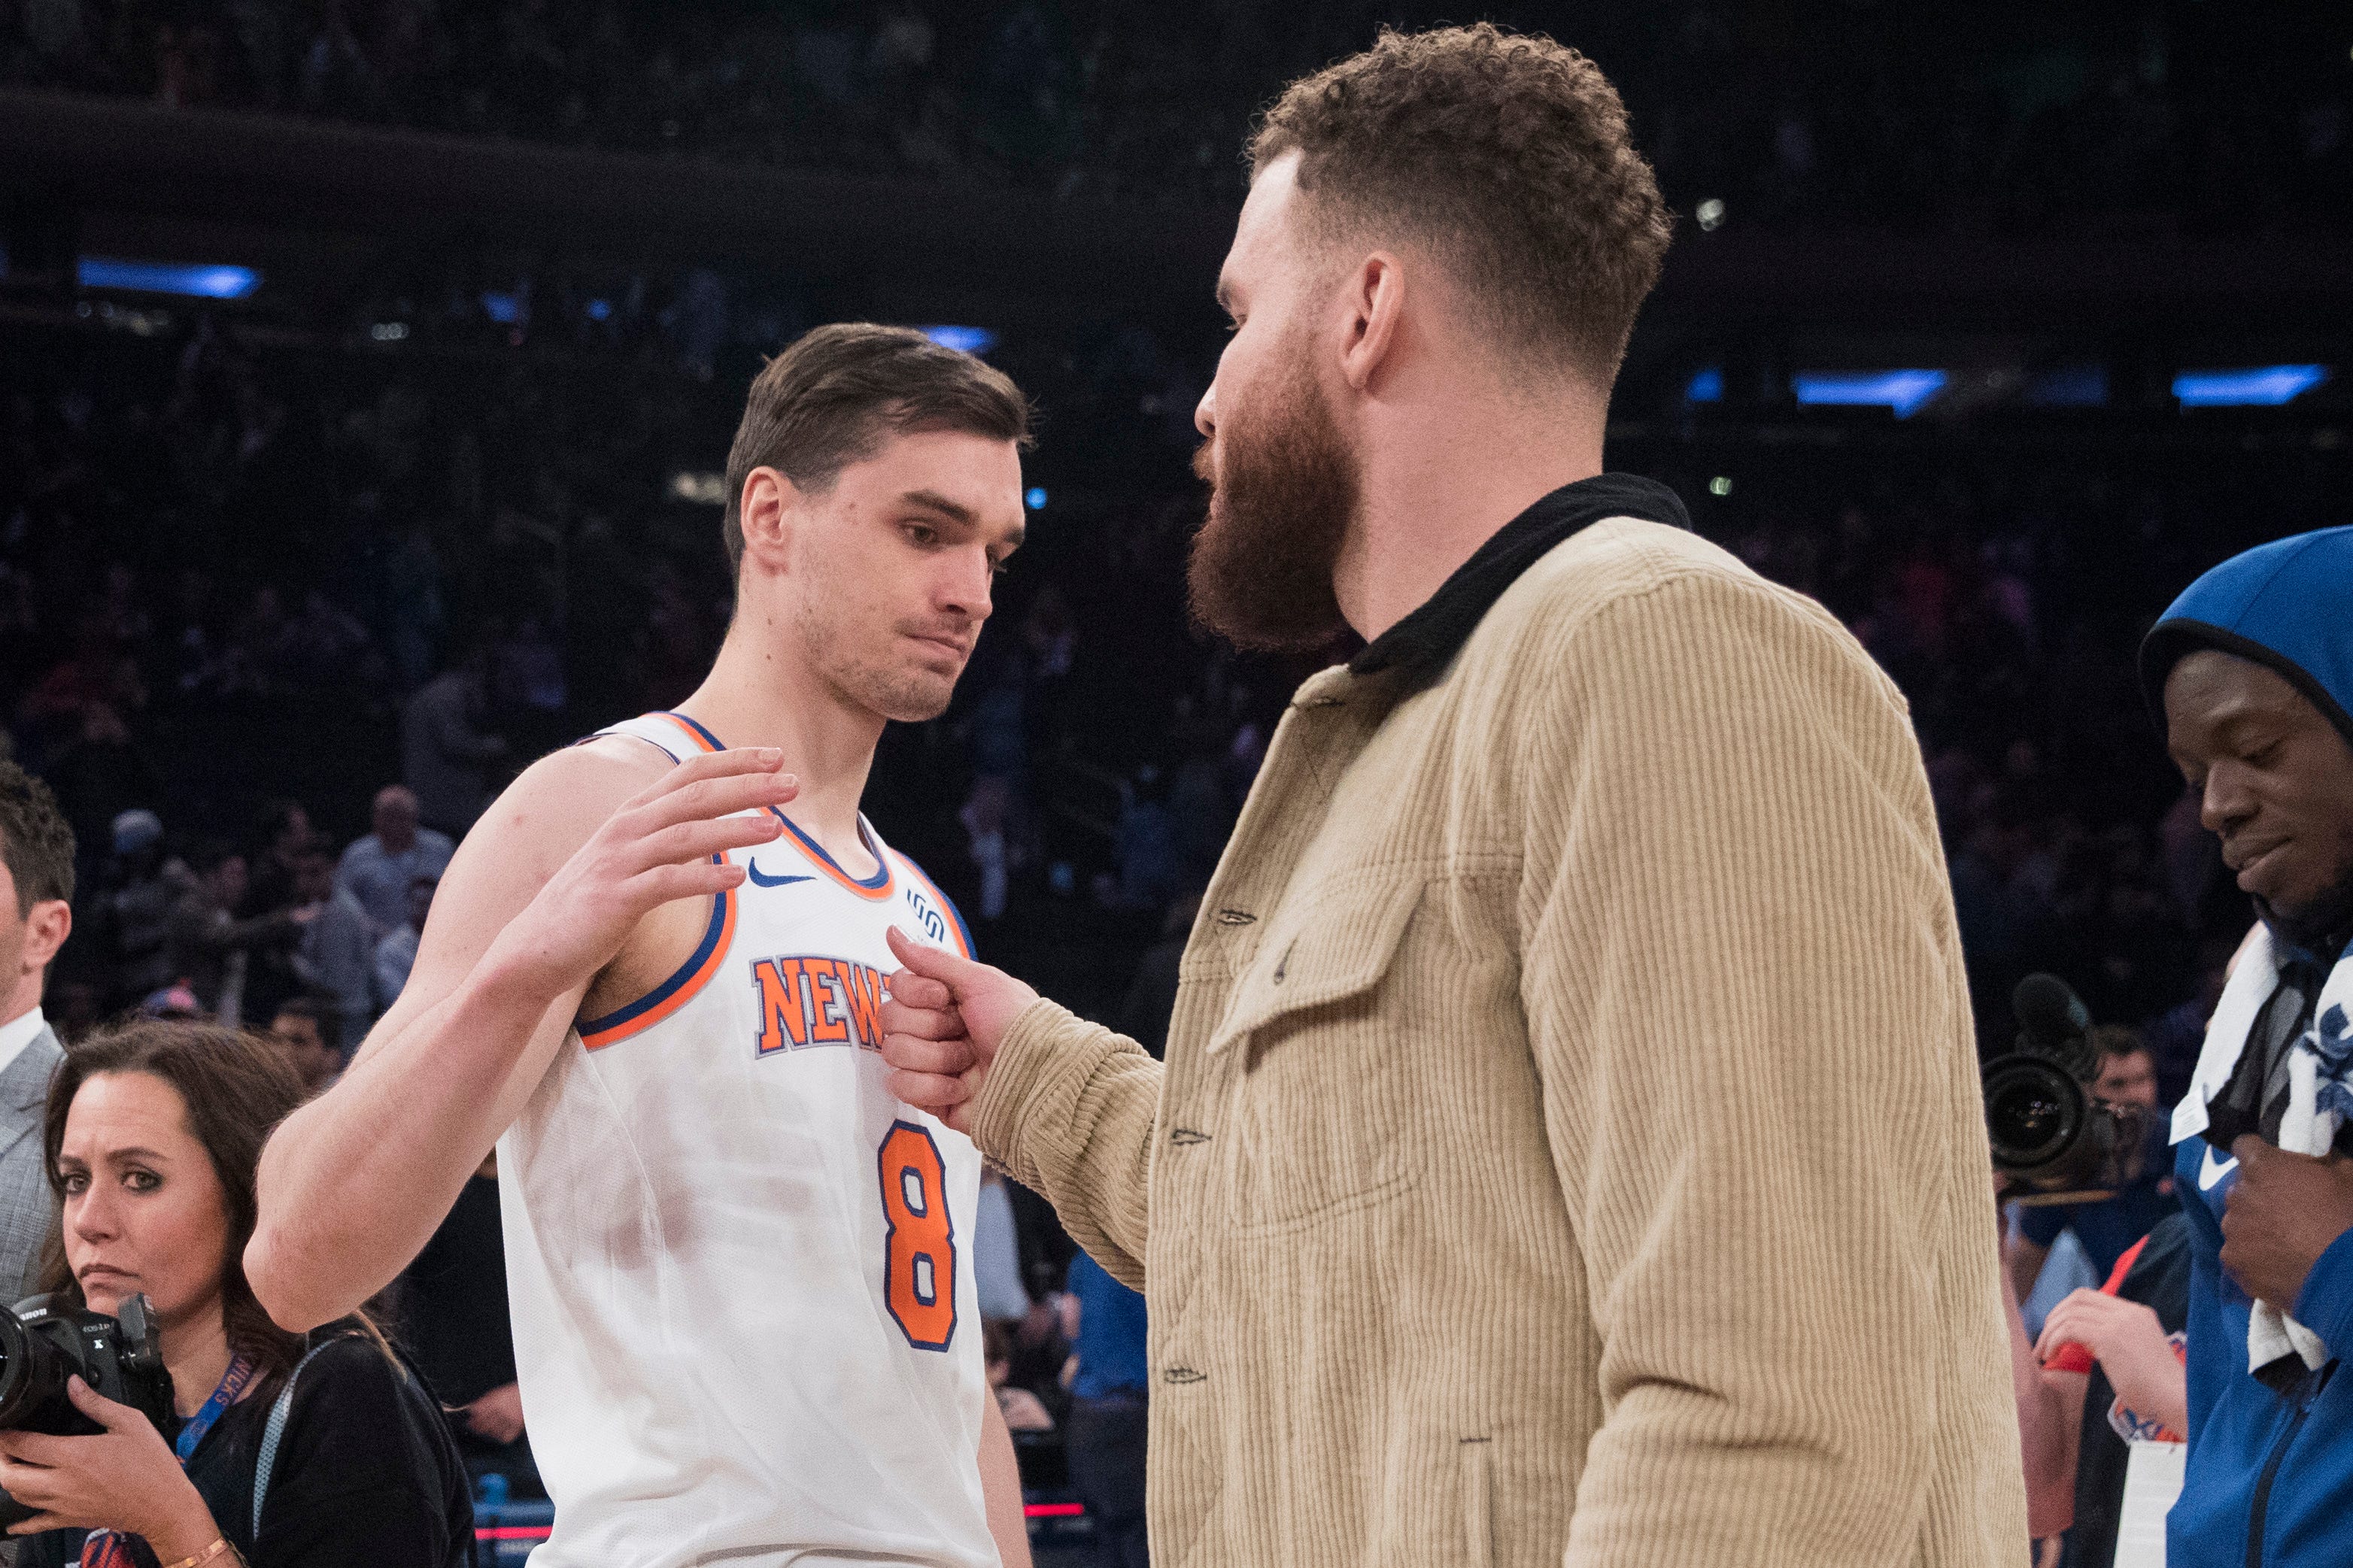 New York Knicks forward Mario Hezonja (8) greets Detroit Pistons forward Blake Griffin at the end of the game.